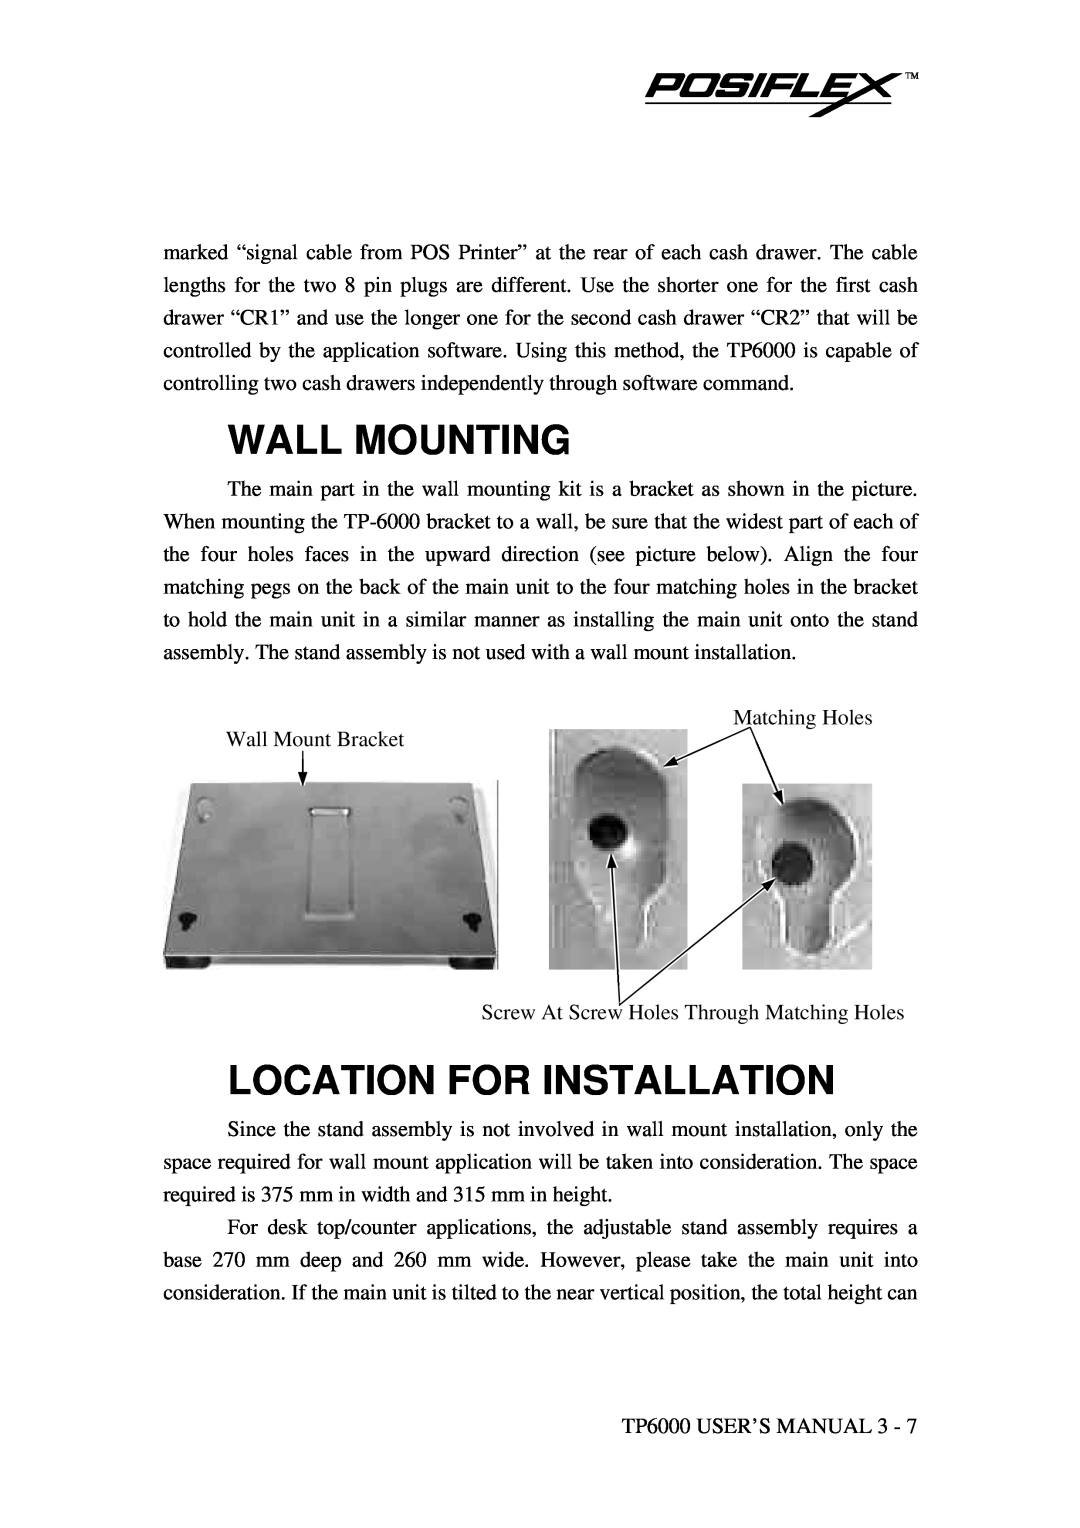 Mustek TP-6000 user manual Wall Mounting, Location For Installation 